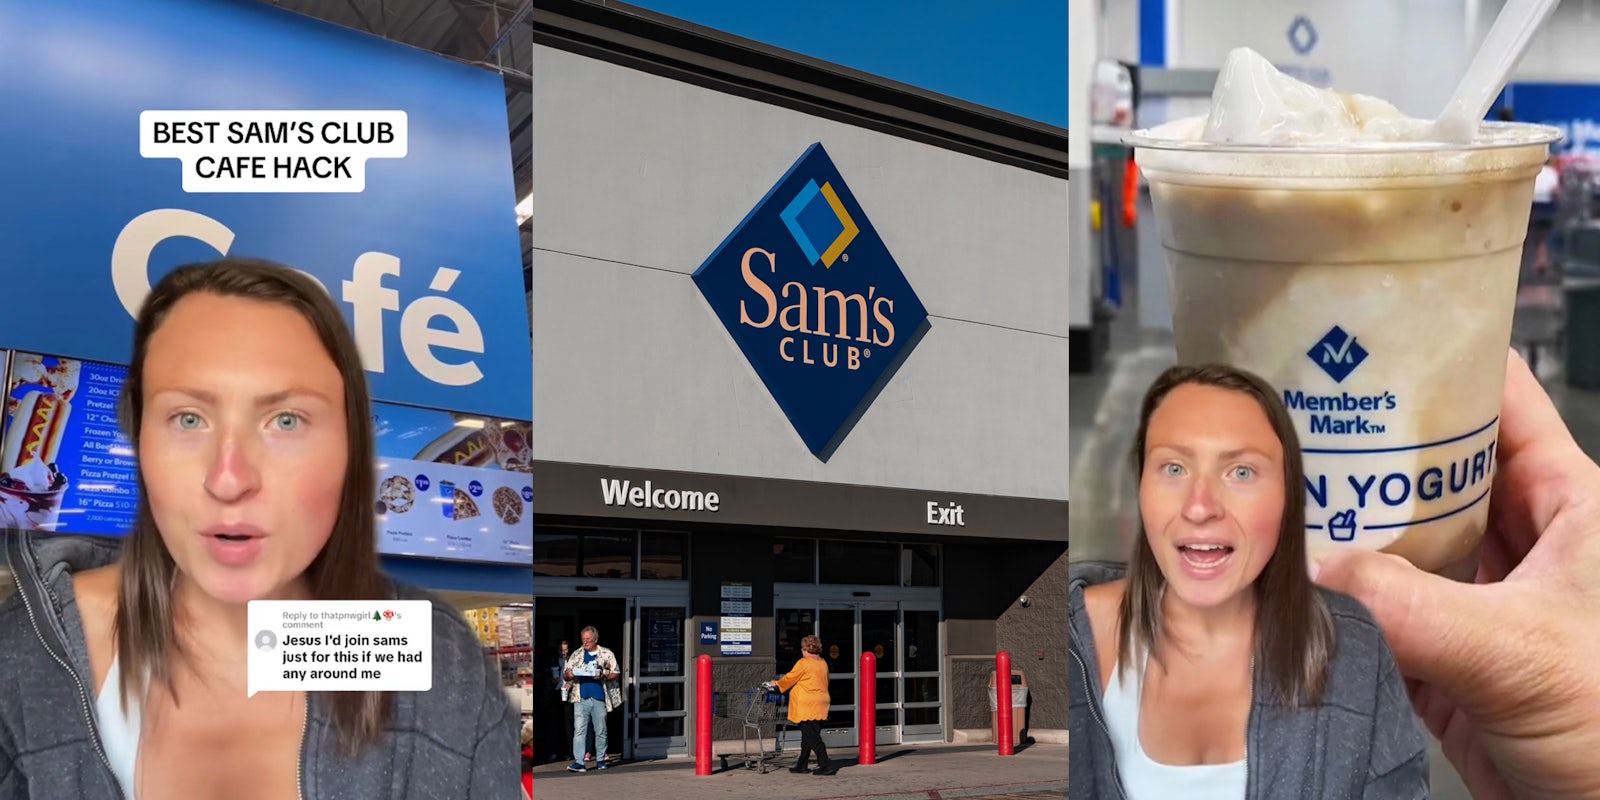 Sam's Club customer greenscreen TikTok speaking with caption 'BEST SAM'S CLUB CAFE HACK' 'Jesus I'd join sams just for this if we had any around me' (l) Sam's Club building entrance with sign (c) Sam's Club customer greenscreen TikTok over image of diy rootbeer float (r)